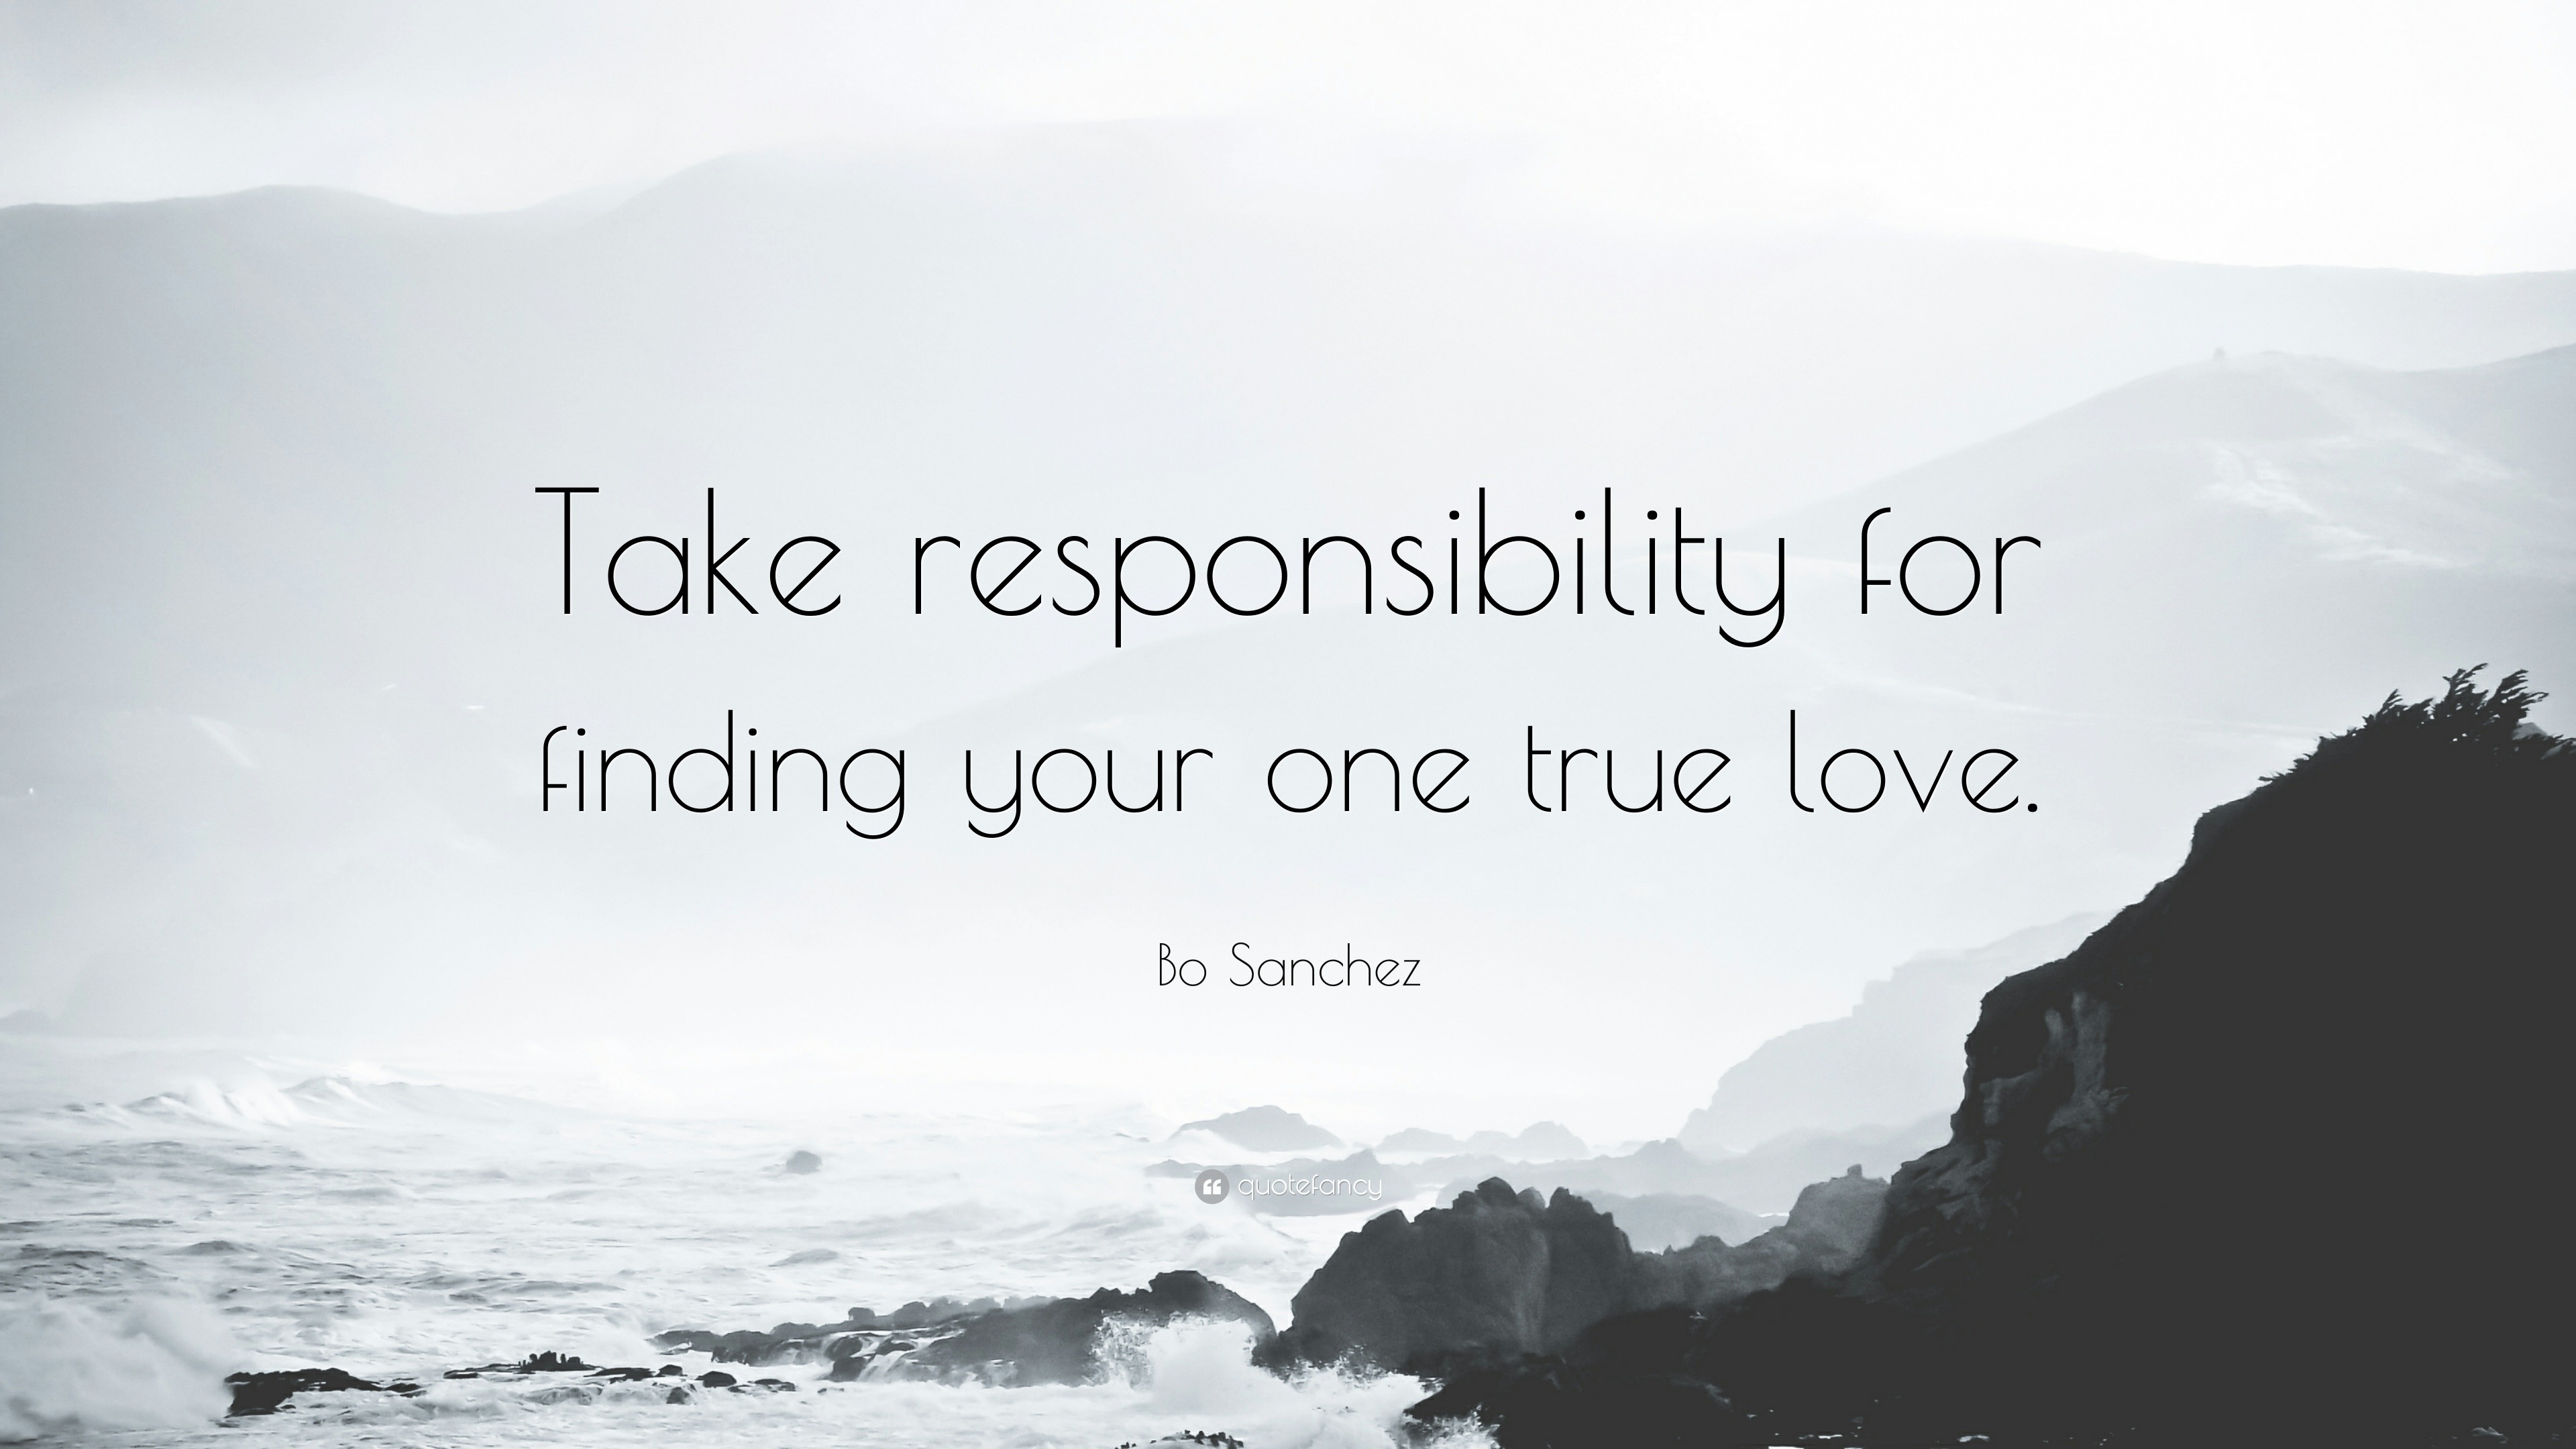 Bo Sanchez Quote “Take responsibility for finding your one true love ”